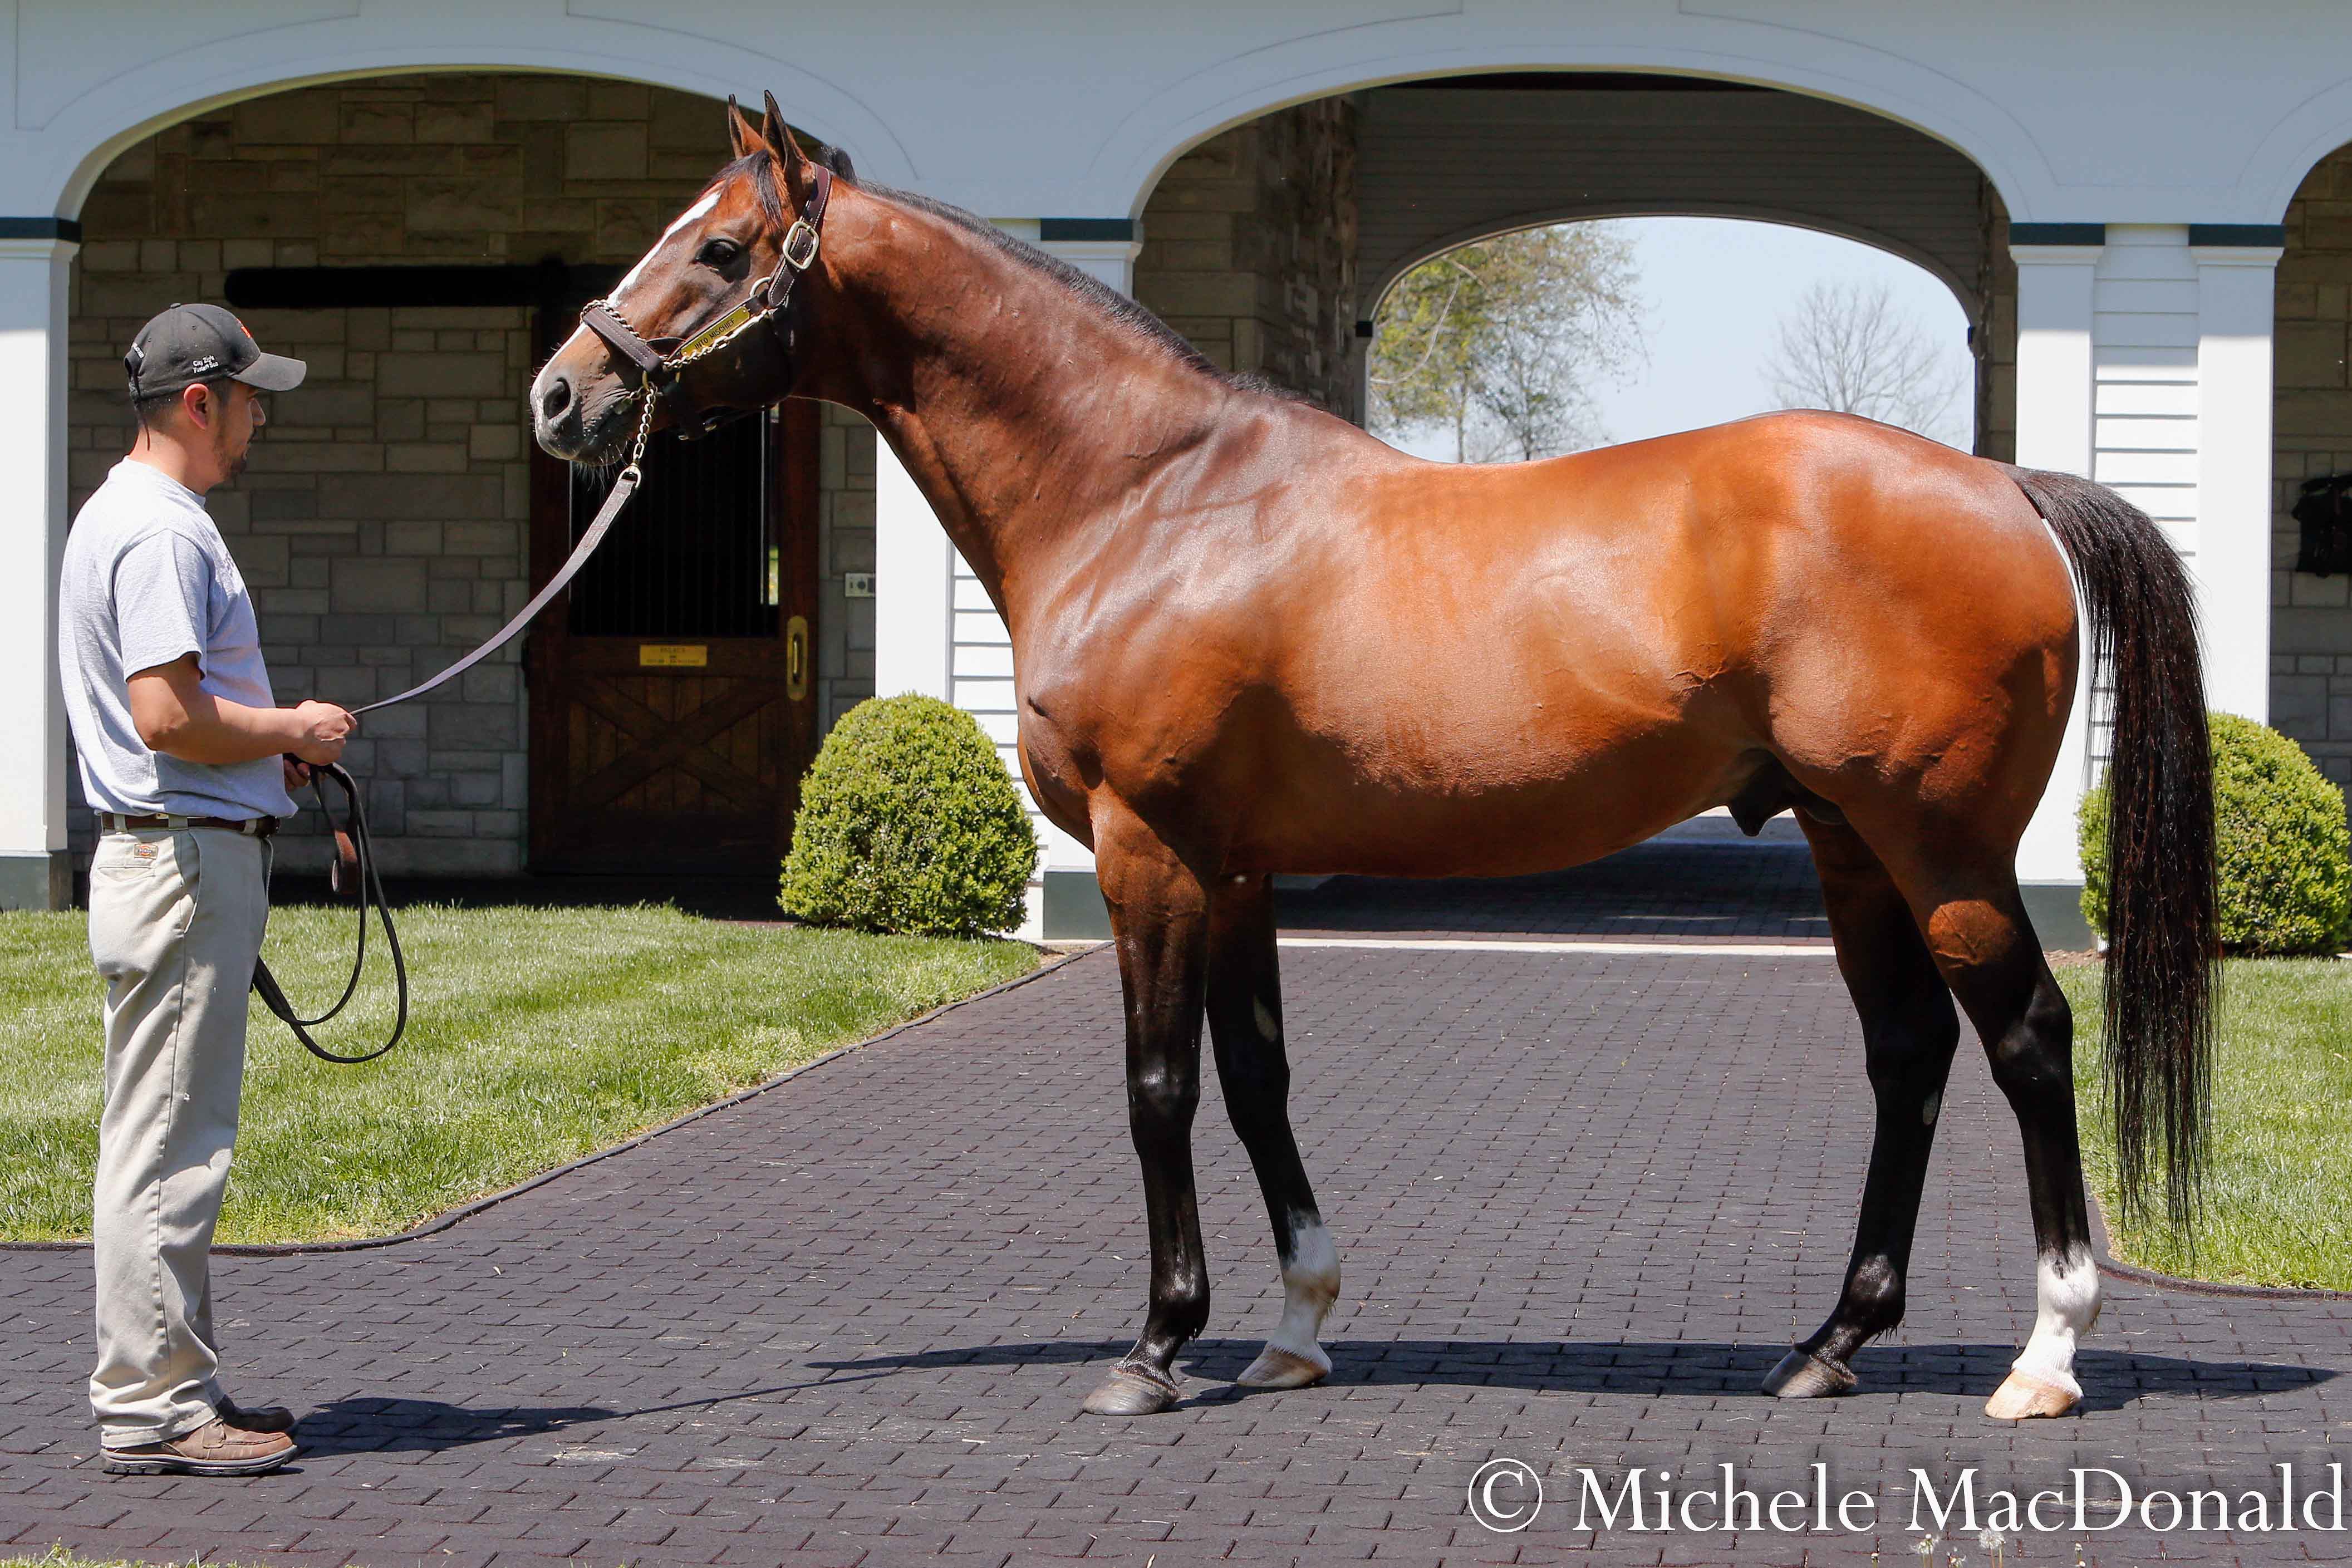 Star sire: Into Mischief, another son of Leslie’s Lady, at Spendthrift Farm in Kentucky. Photo: Michele MacDonald